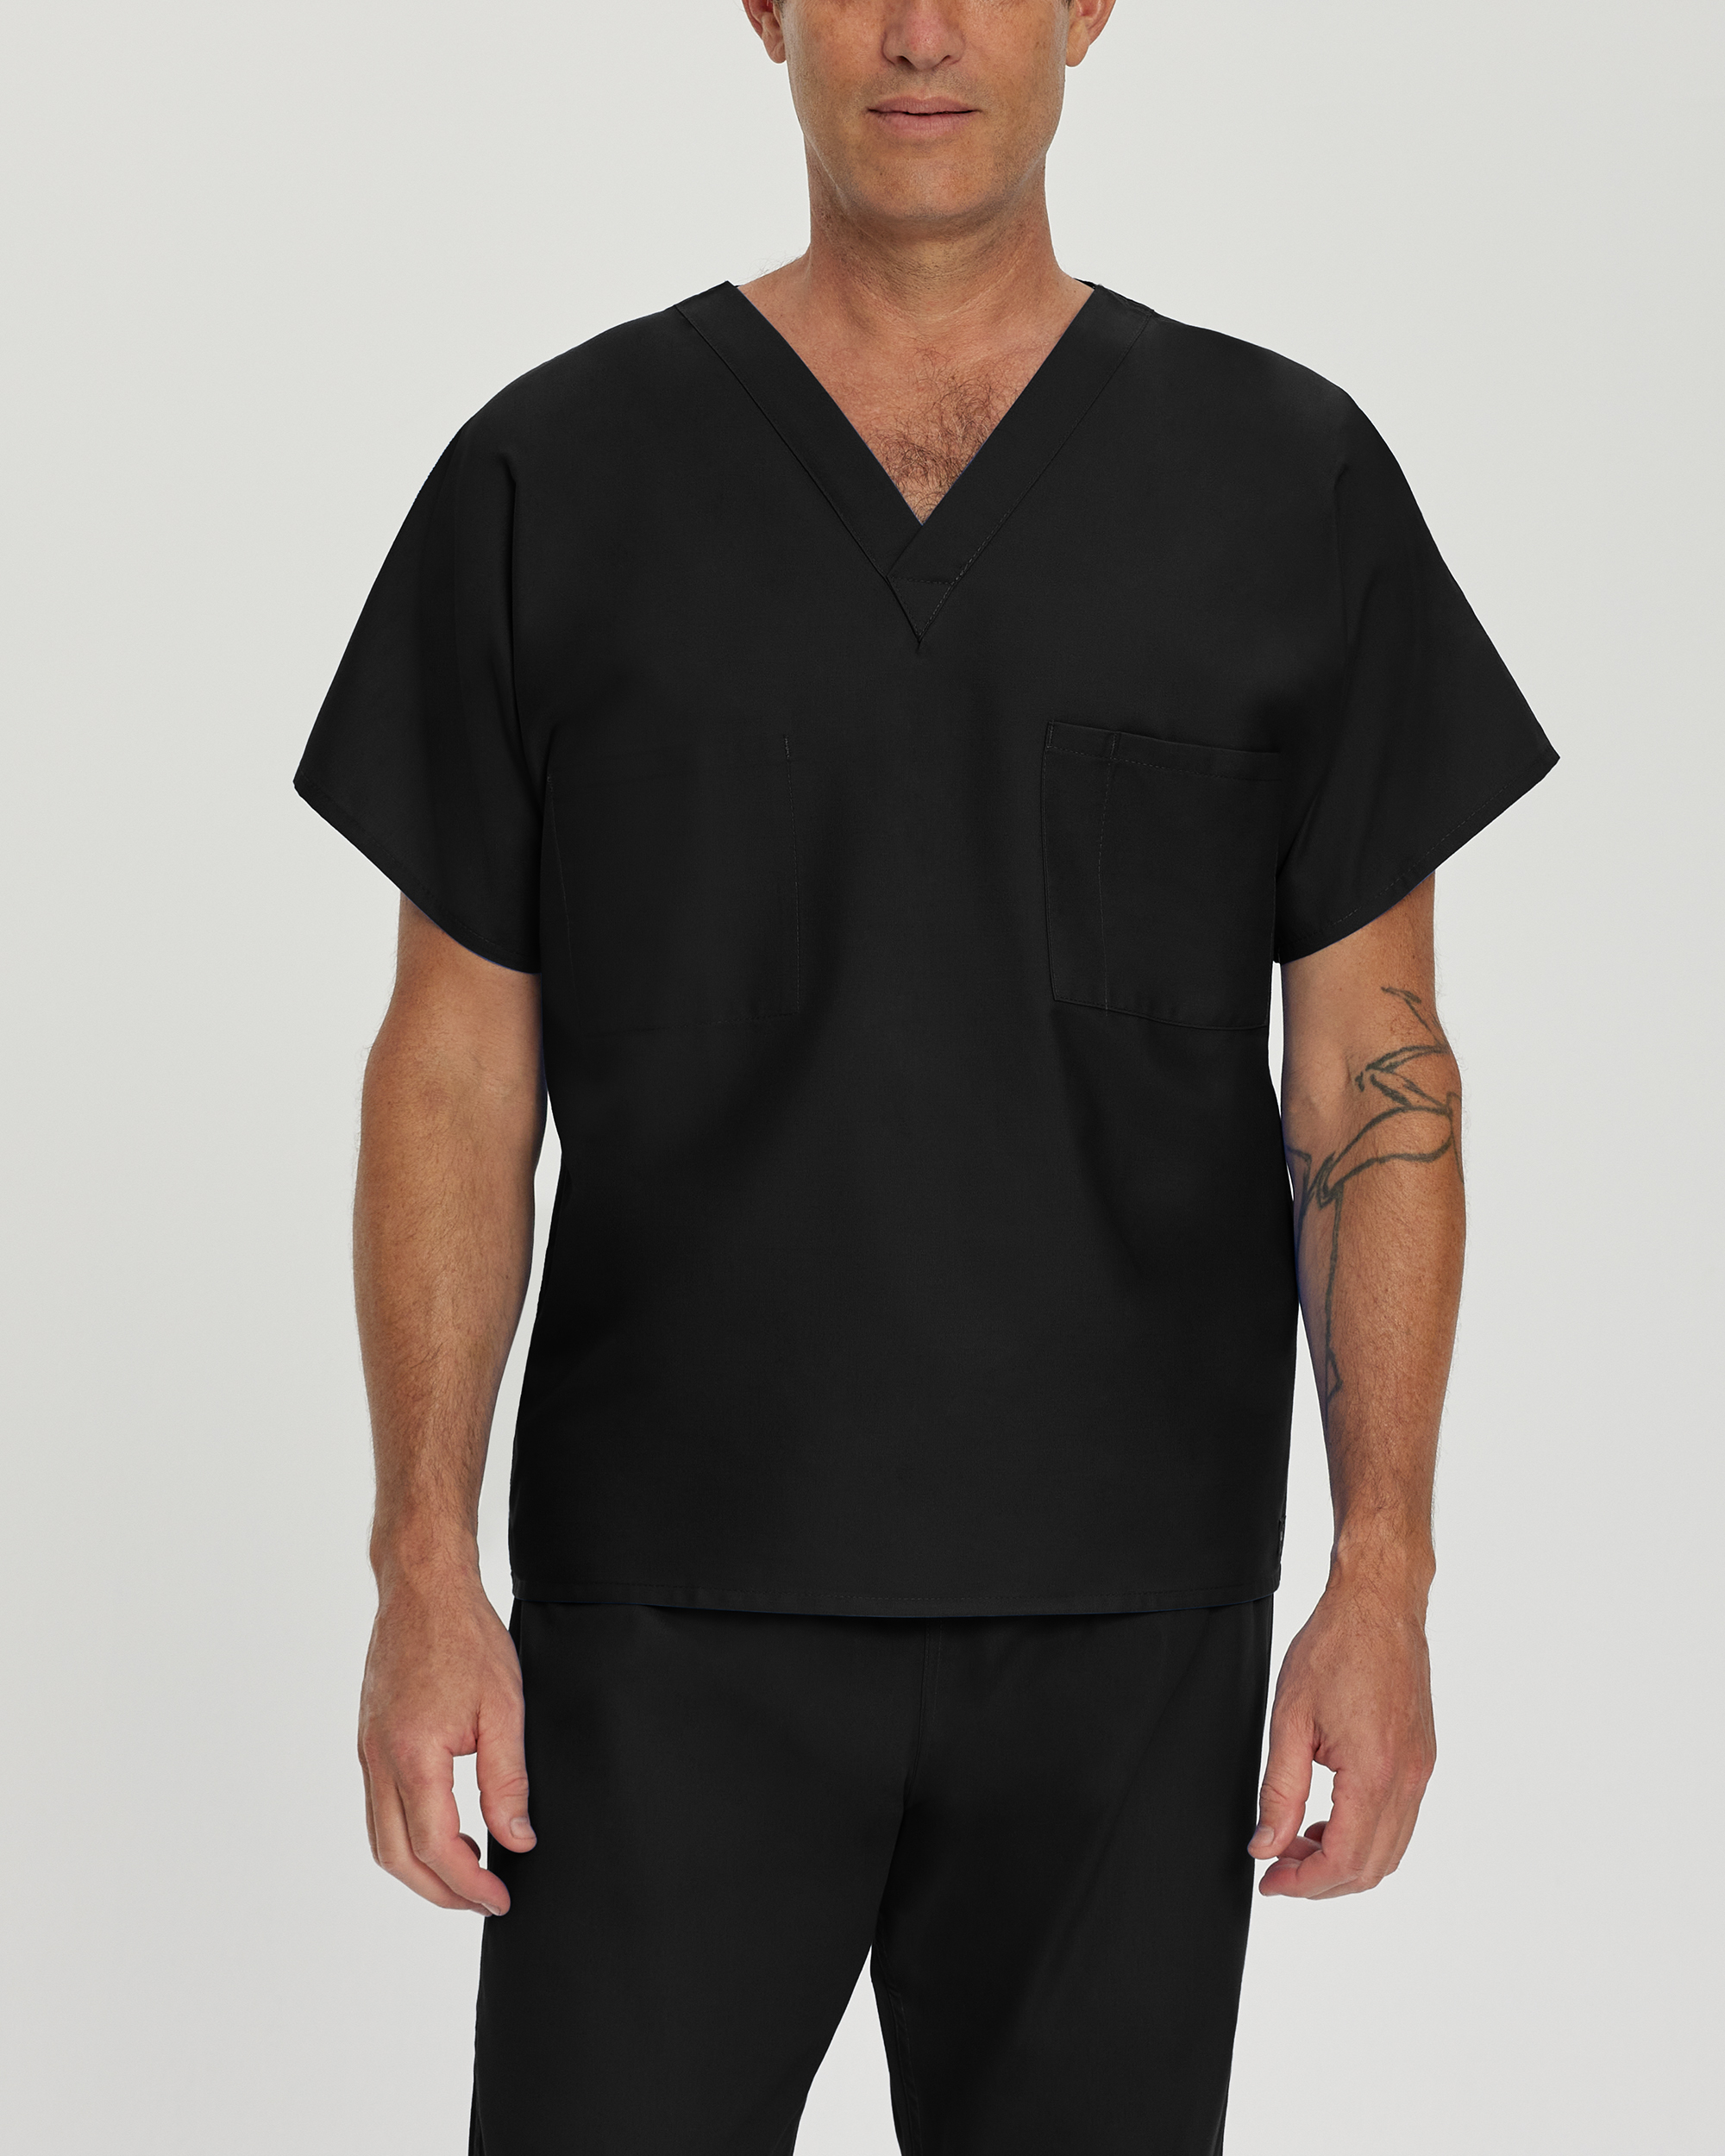 What are the care instructions for the Landau 7502 V-neck scrub shirt?